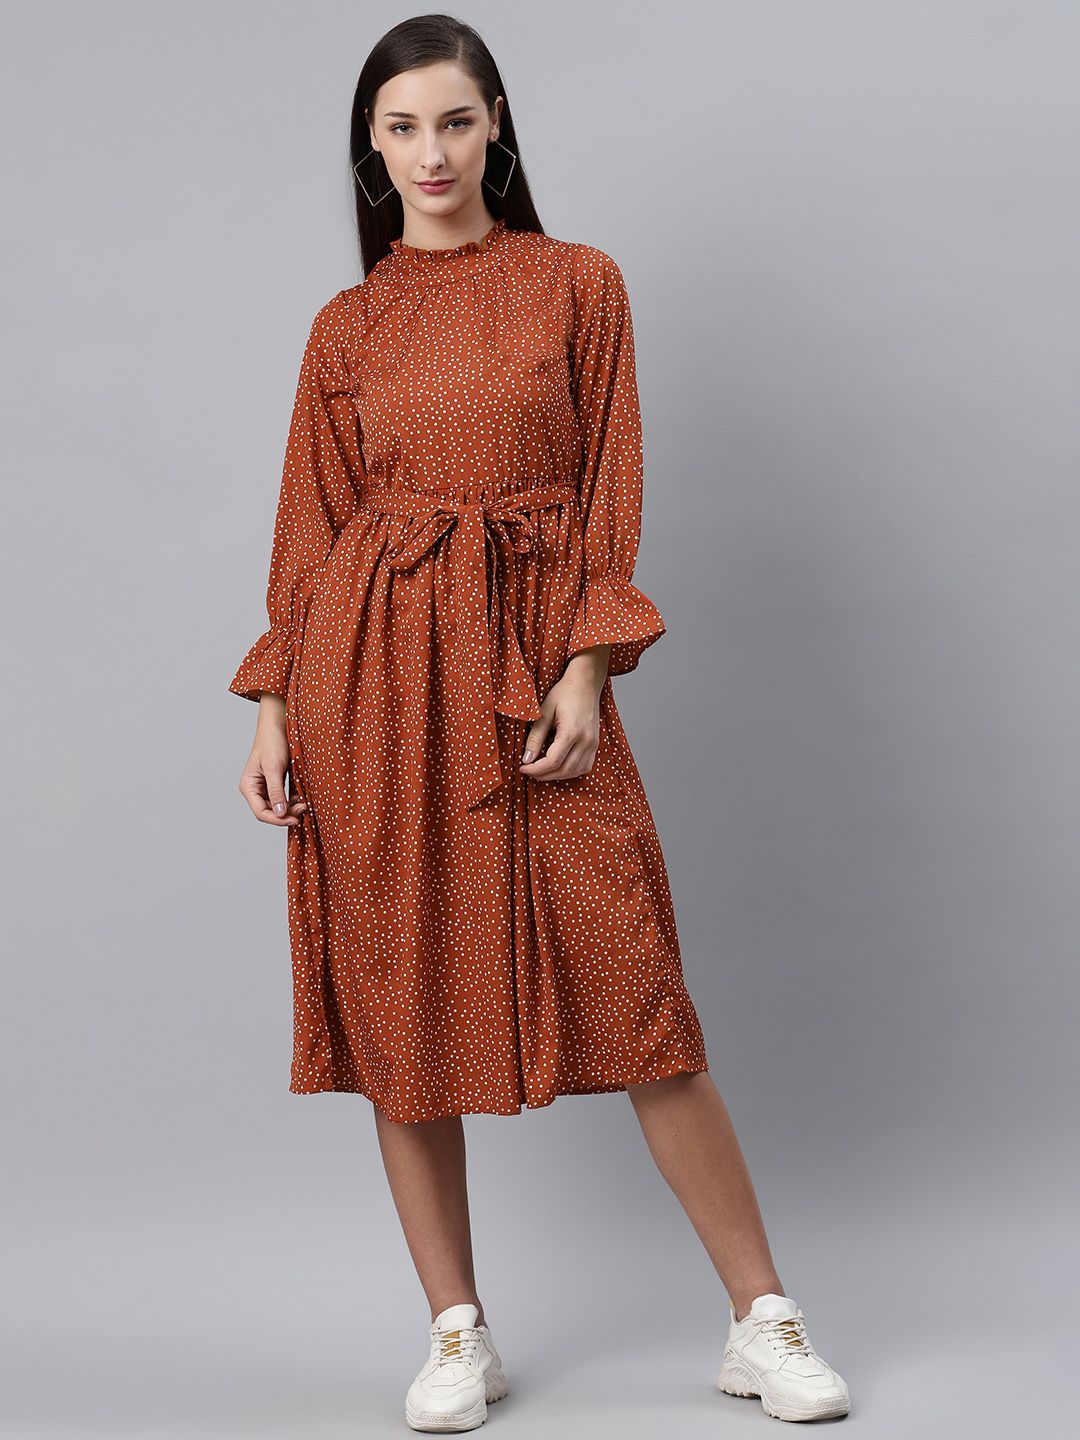 plusS Women Rust Brown & White Dotted Print A-Line Dress with Belt Price in India